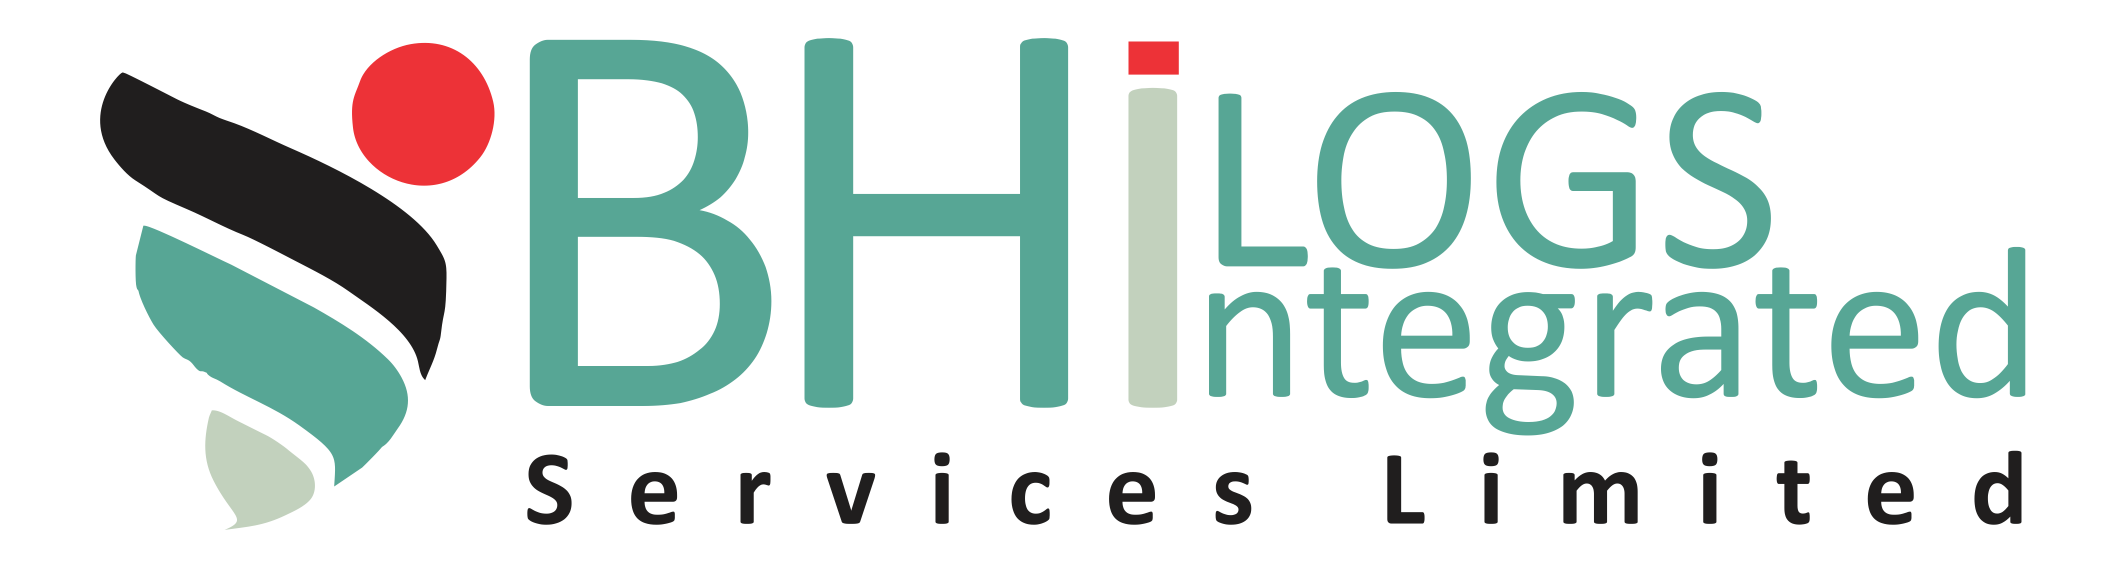 Bhilogs Integrated Service Limited